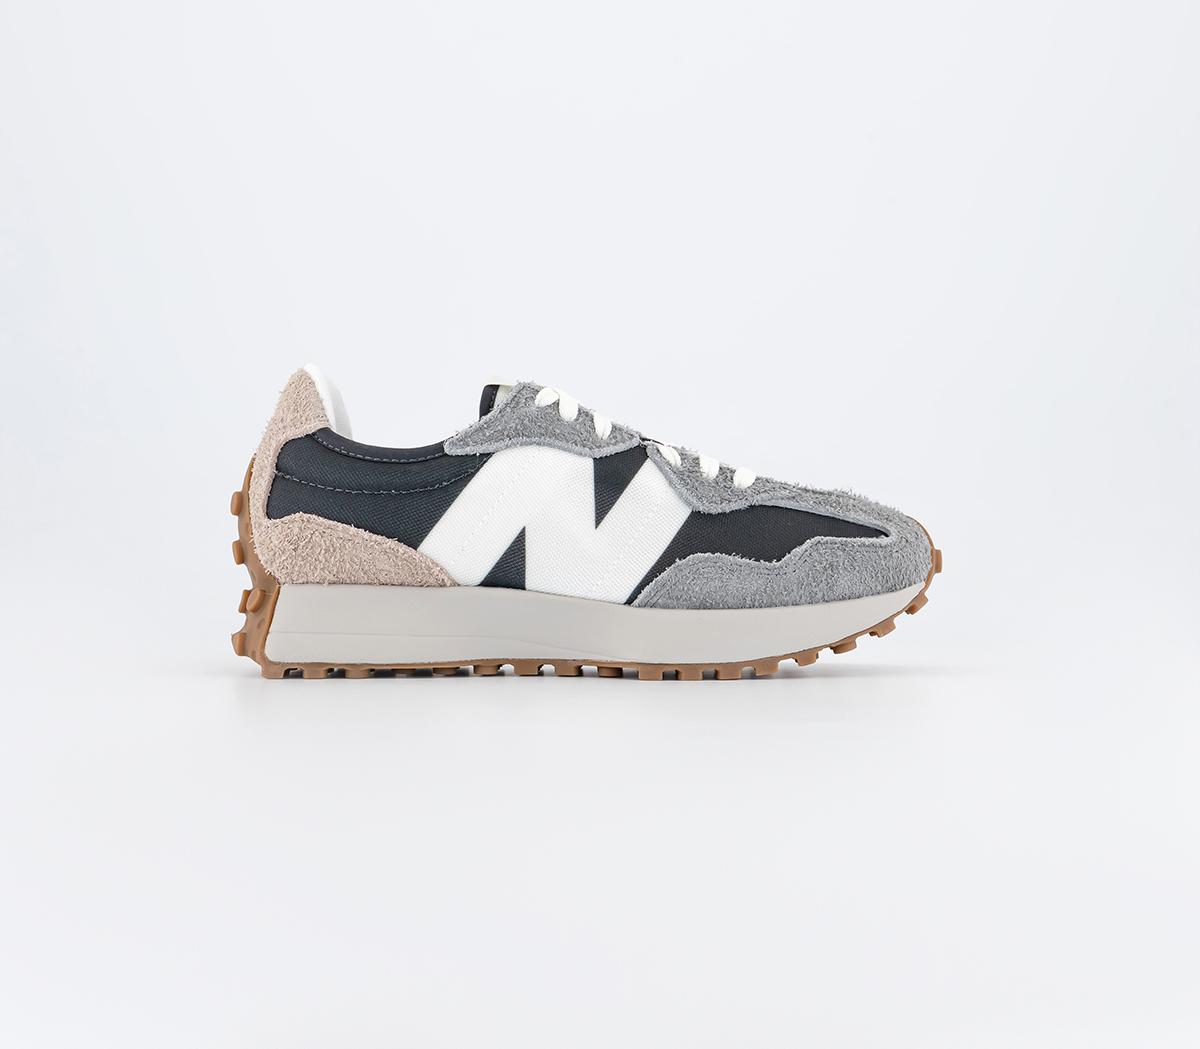 New Balance 327 trainers BLACK Grey Off White with gum sole - ALL SIZES